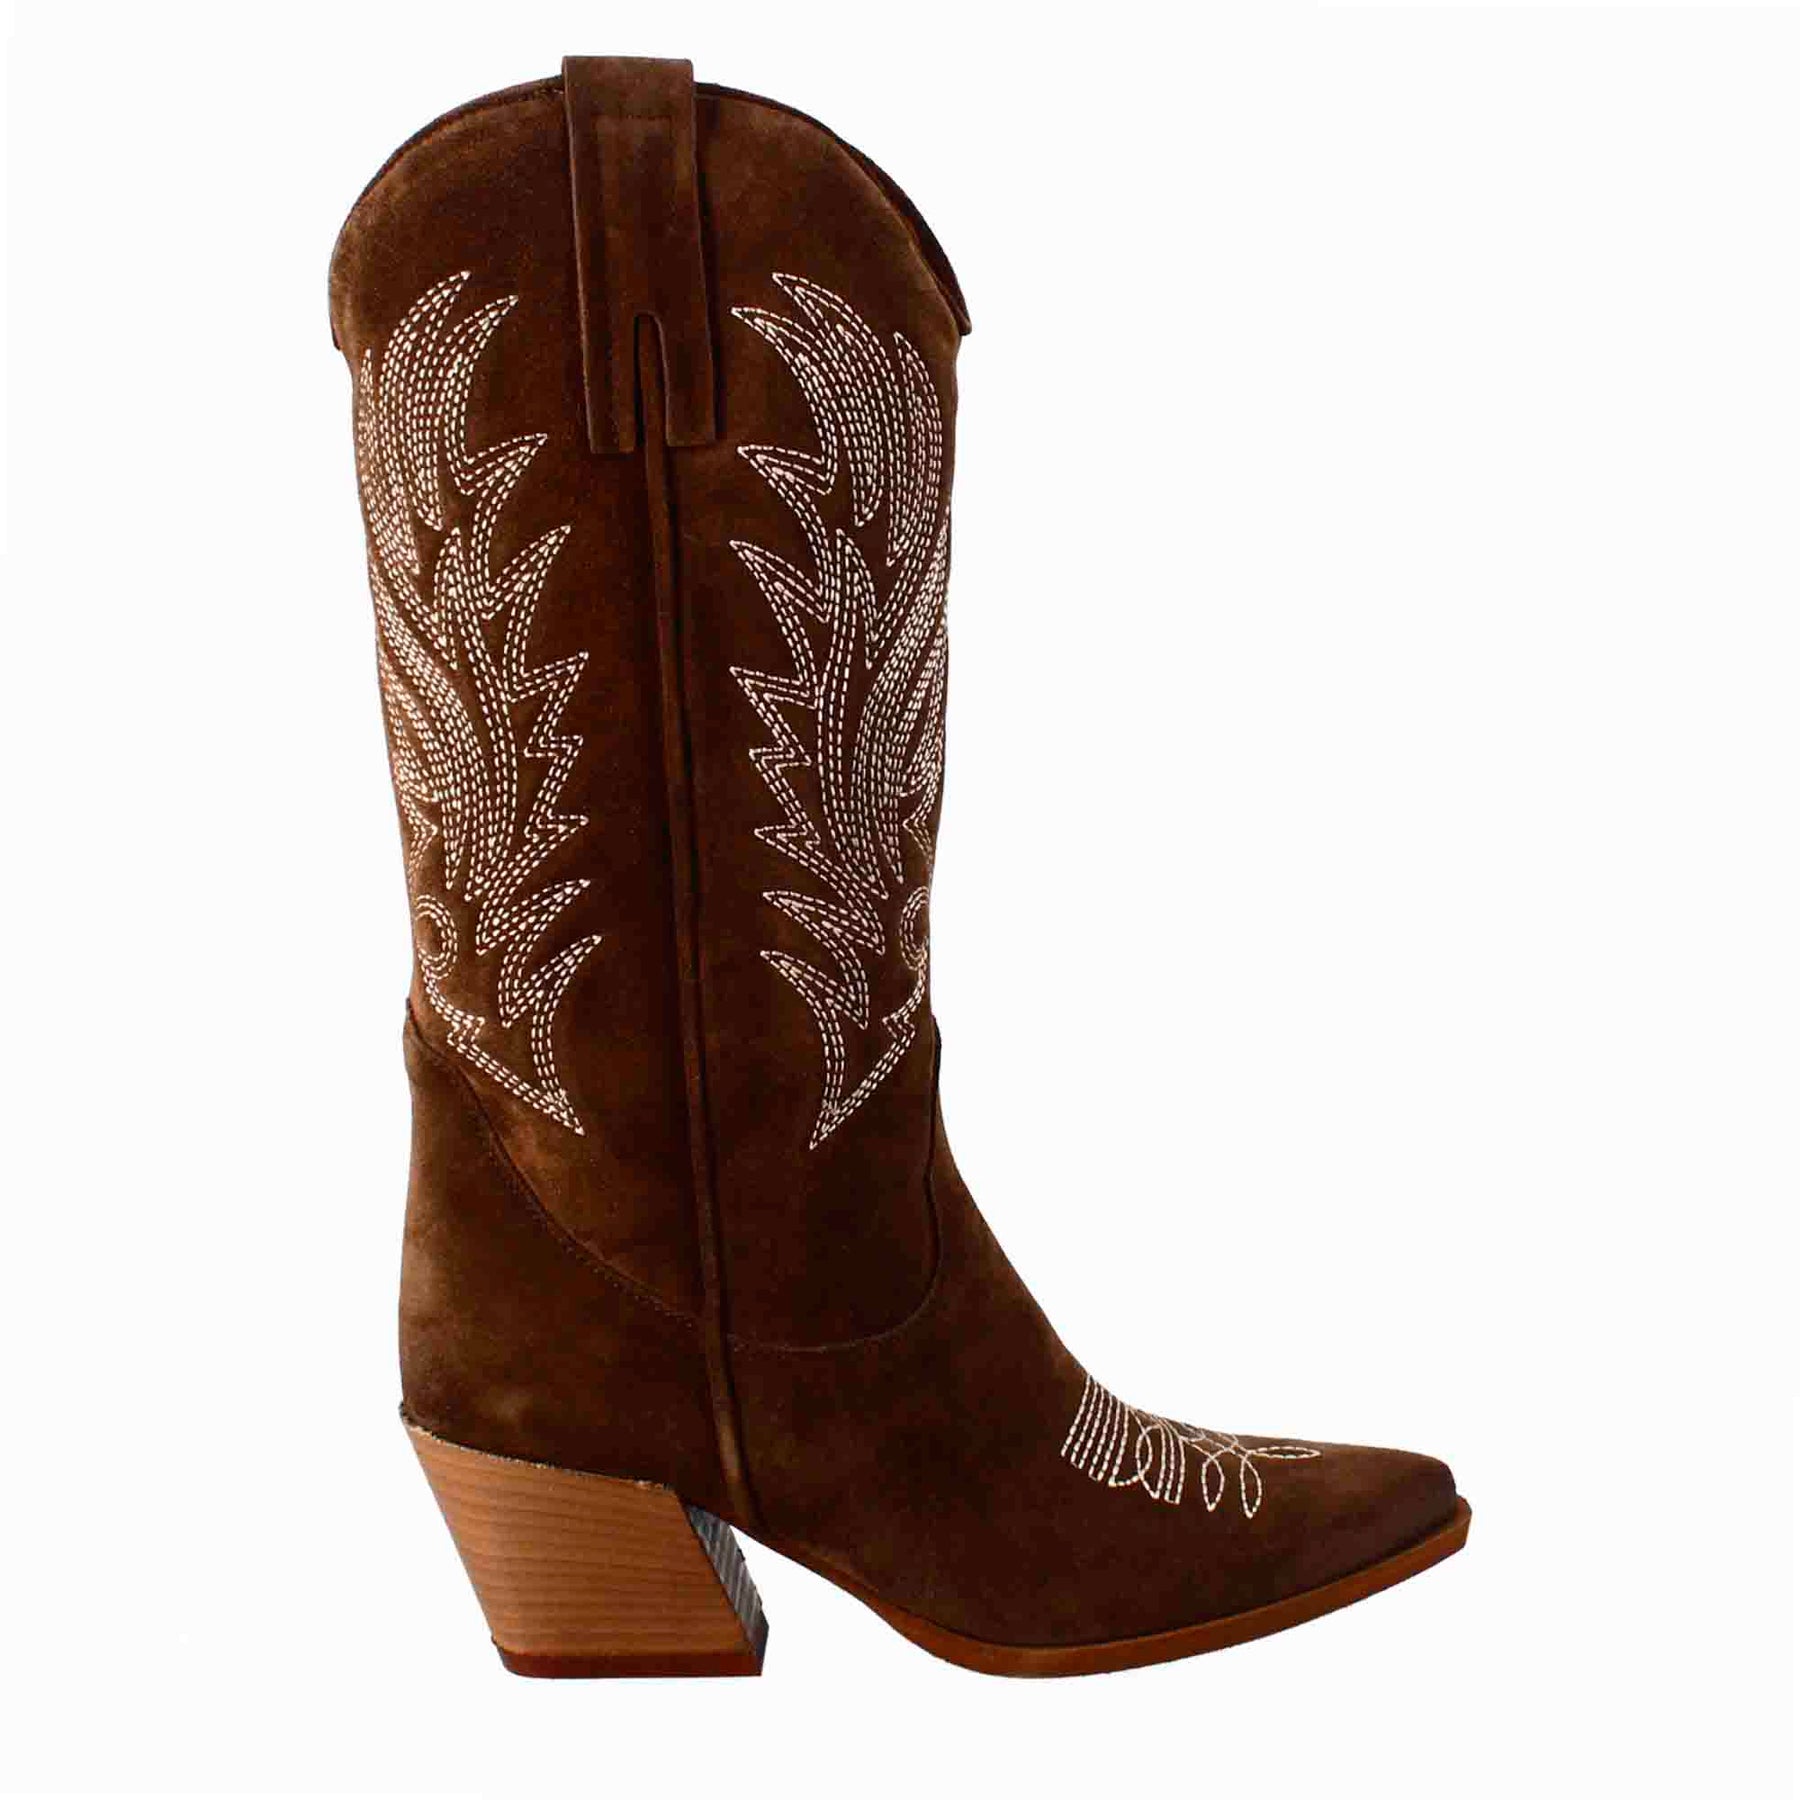 Women's Texan ankle boot in chocolate brown suede with embroidery